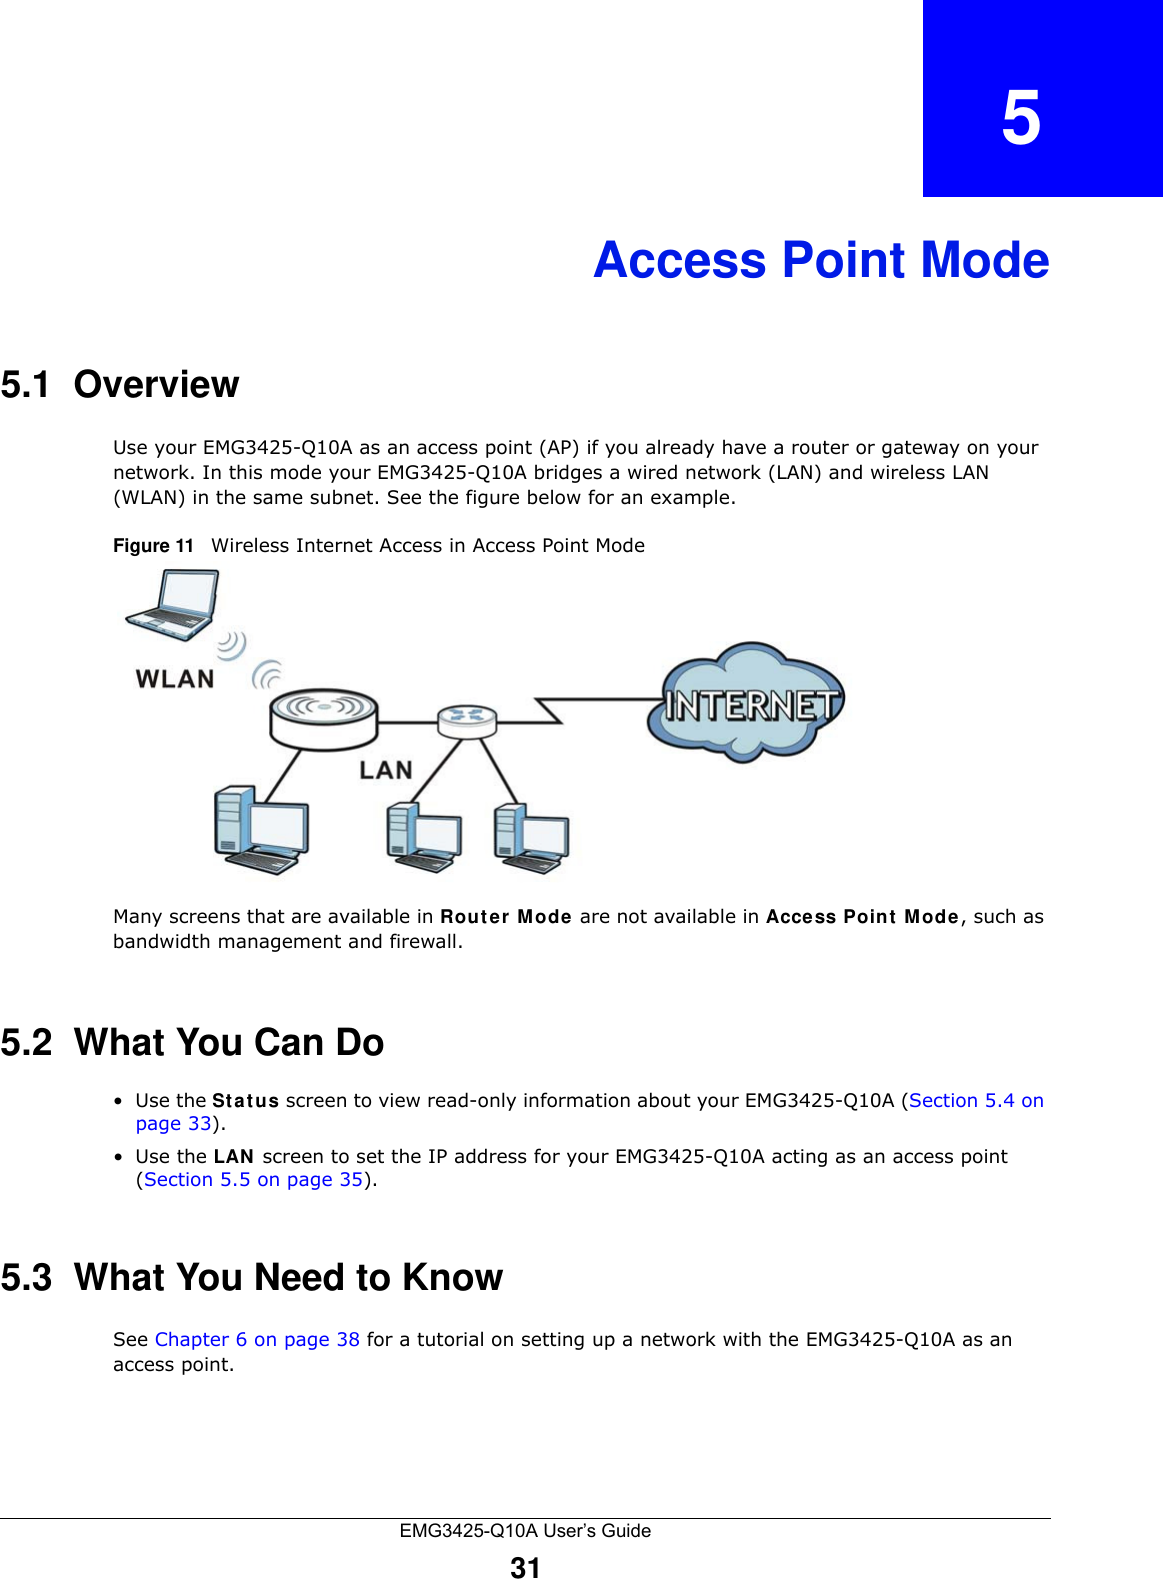 EMG3425-Q10A User’s Guide31CHAPTER   5Access Point Mode5.1  OverviewUse your EMG3425-Q10A as an access point (AP) if you already have a router or gateway on your network. In this mode your EMG3425-Q10A bridges a wired network (LAN) and wireless LAN (WLAN) in the same subnet. See the figure below for an example.Figure 11   Wireless Internet Access in Access Point Mode Many screens that are available in Rou t er Mode are not available in Access Poin t  M ode, such as bandwidth management and firewall.5.2  What You Can Do•Use the St a t us screen to view read-only information about your EMG3425-Q10A (Section 5.4 on page 33).•Use the LAN  screen to set the IP address for your EMG3425-Q10A acting as an access point (Section 5.5 on page 35).5.3  What You Need to KnowSee Chapter 6 on page 38 for a tutorial on setting up a network with the EMG3425-Q10A as an access point.